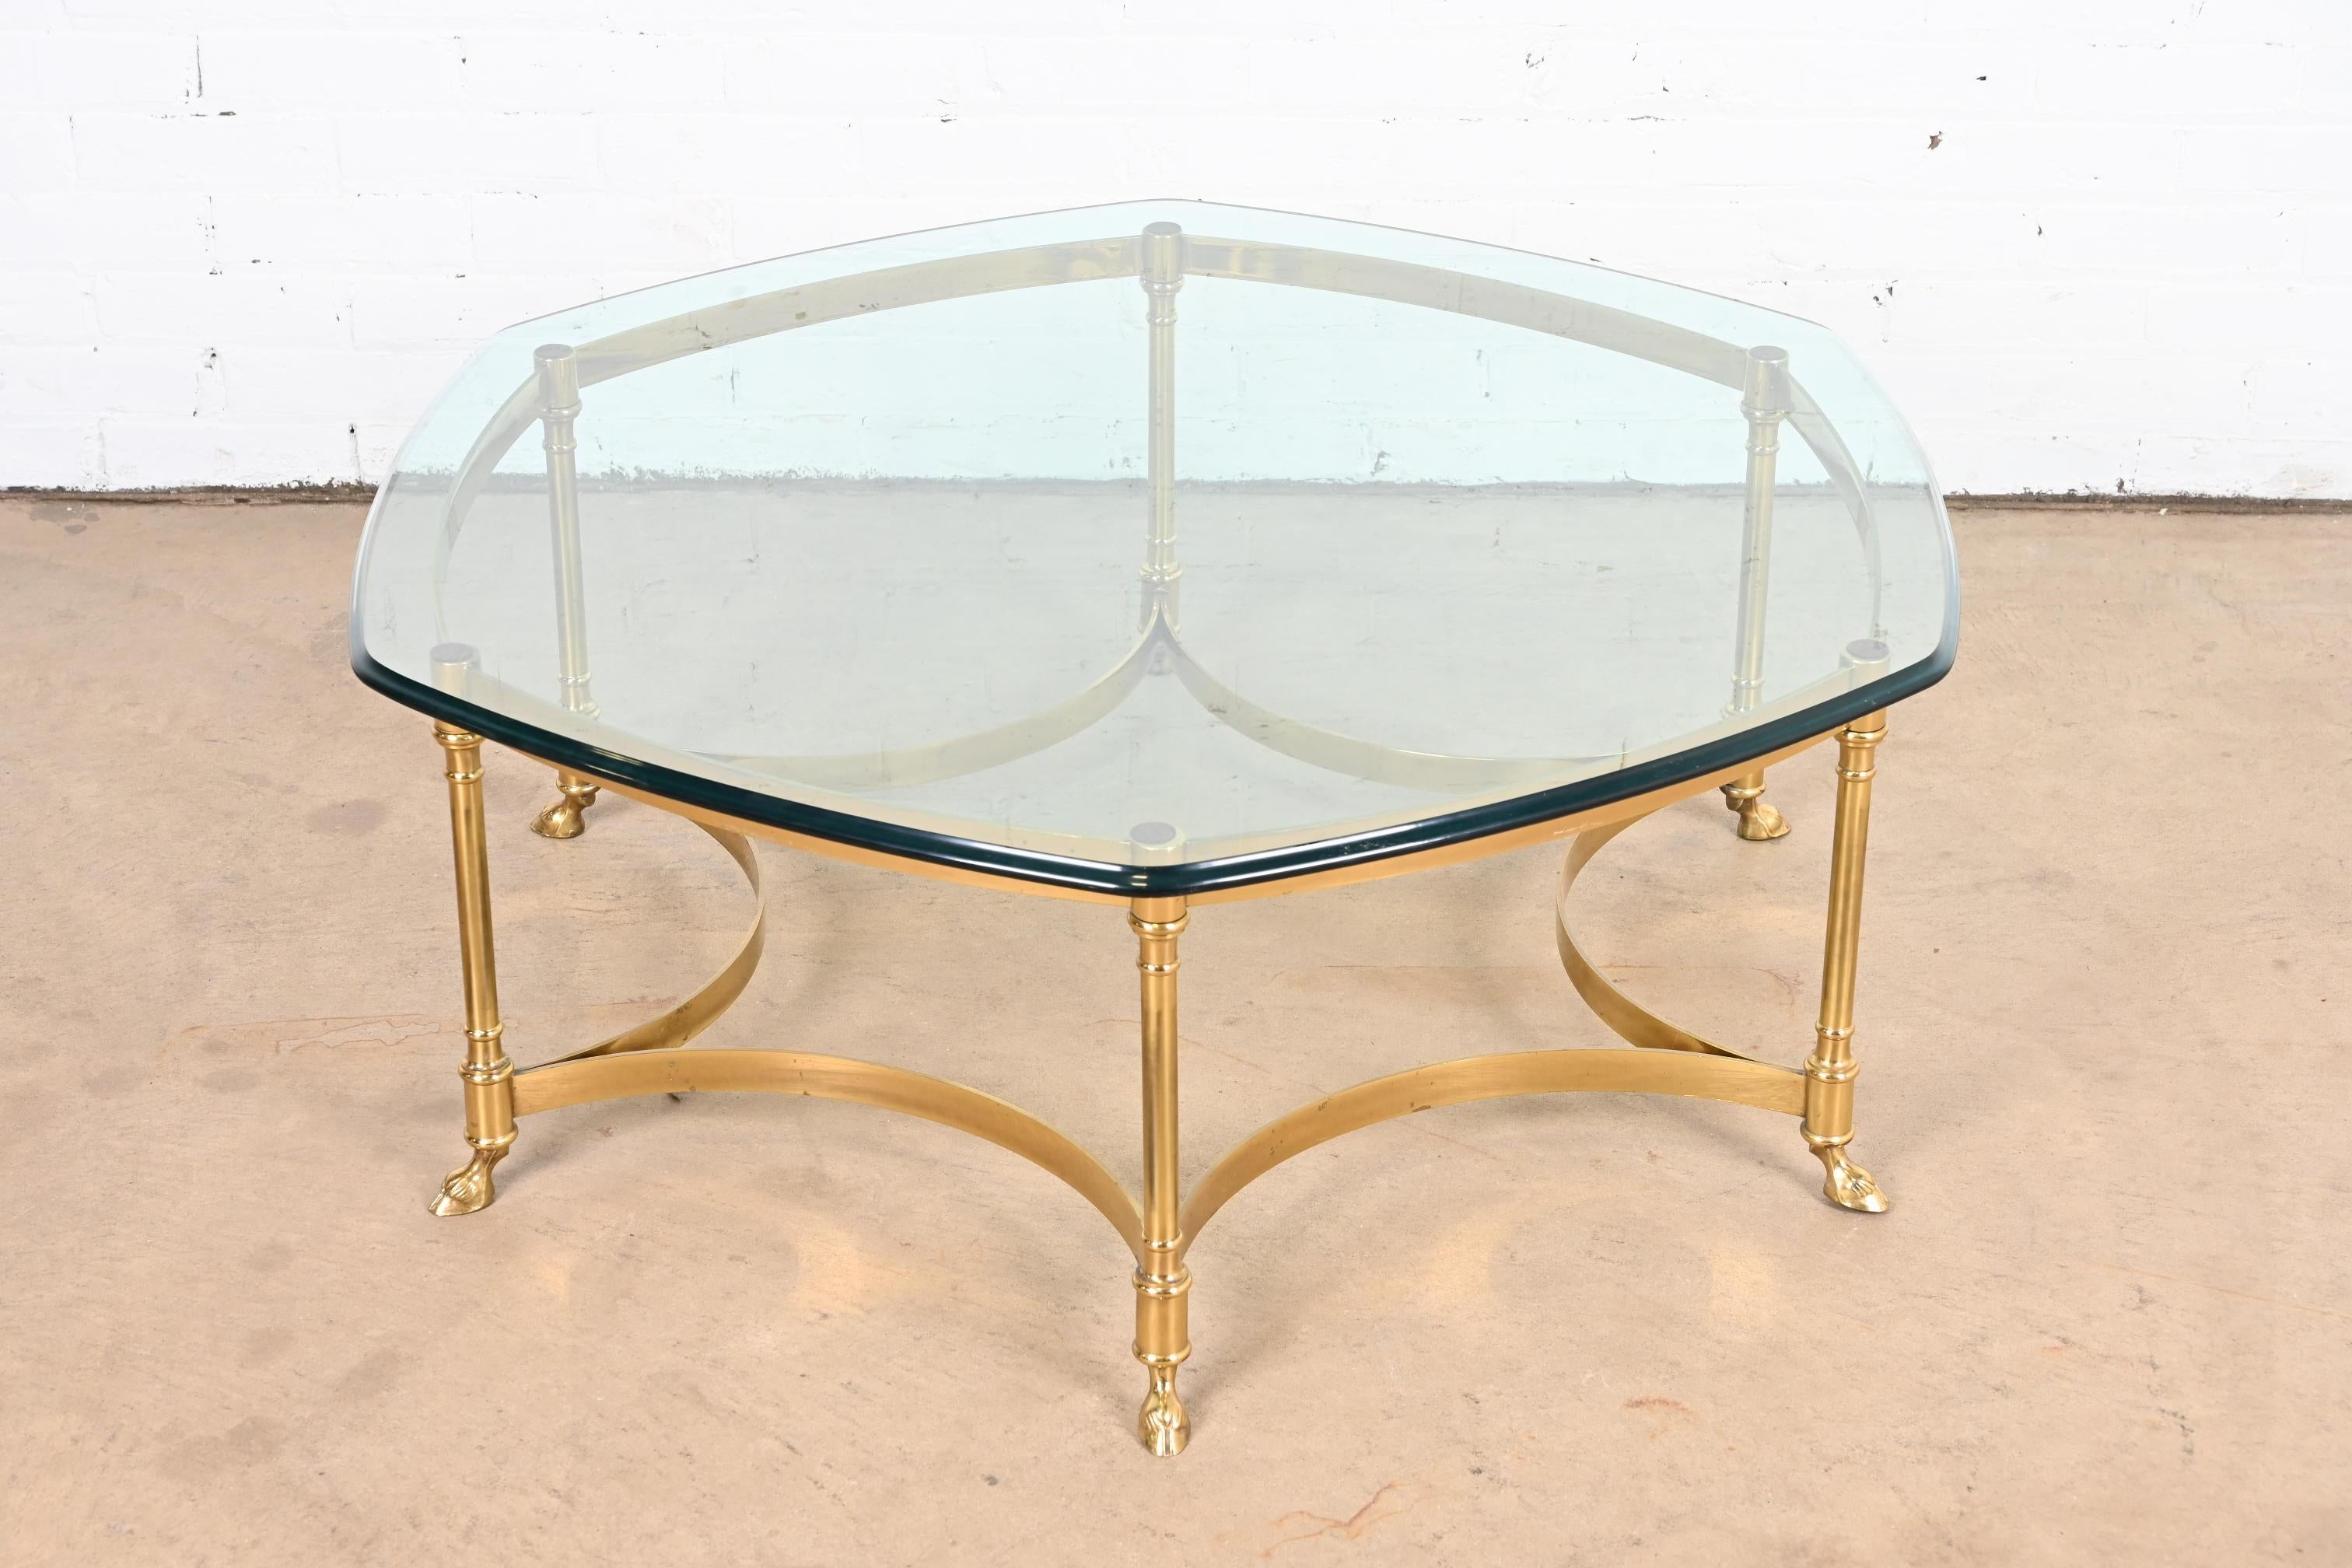 Labarge Hollywood Regency Brass and Glass Hooved Feet Cocktail Table, 1960s For Sale 6